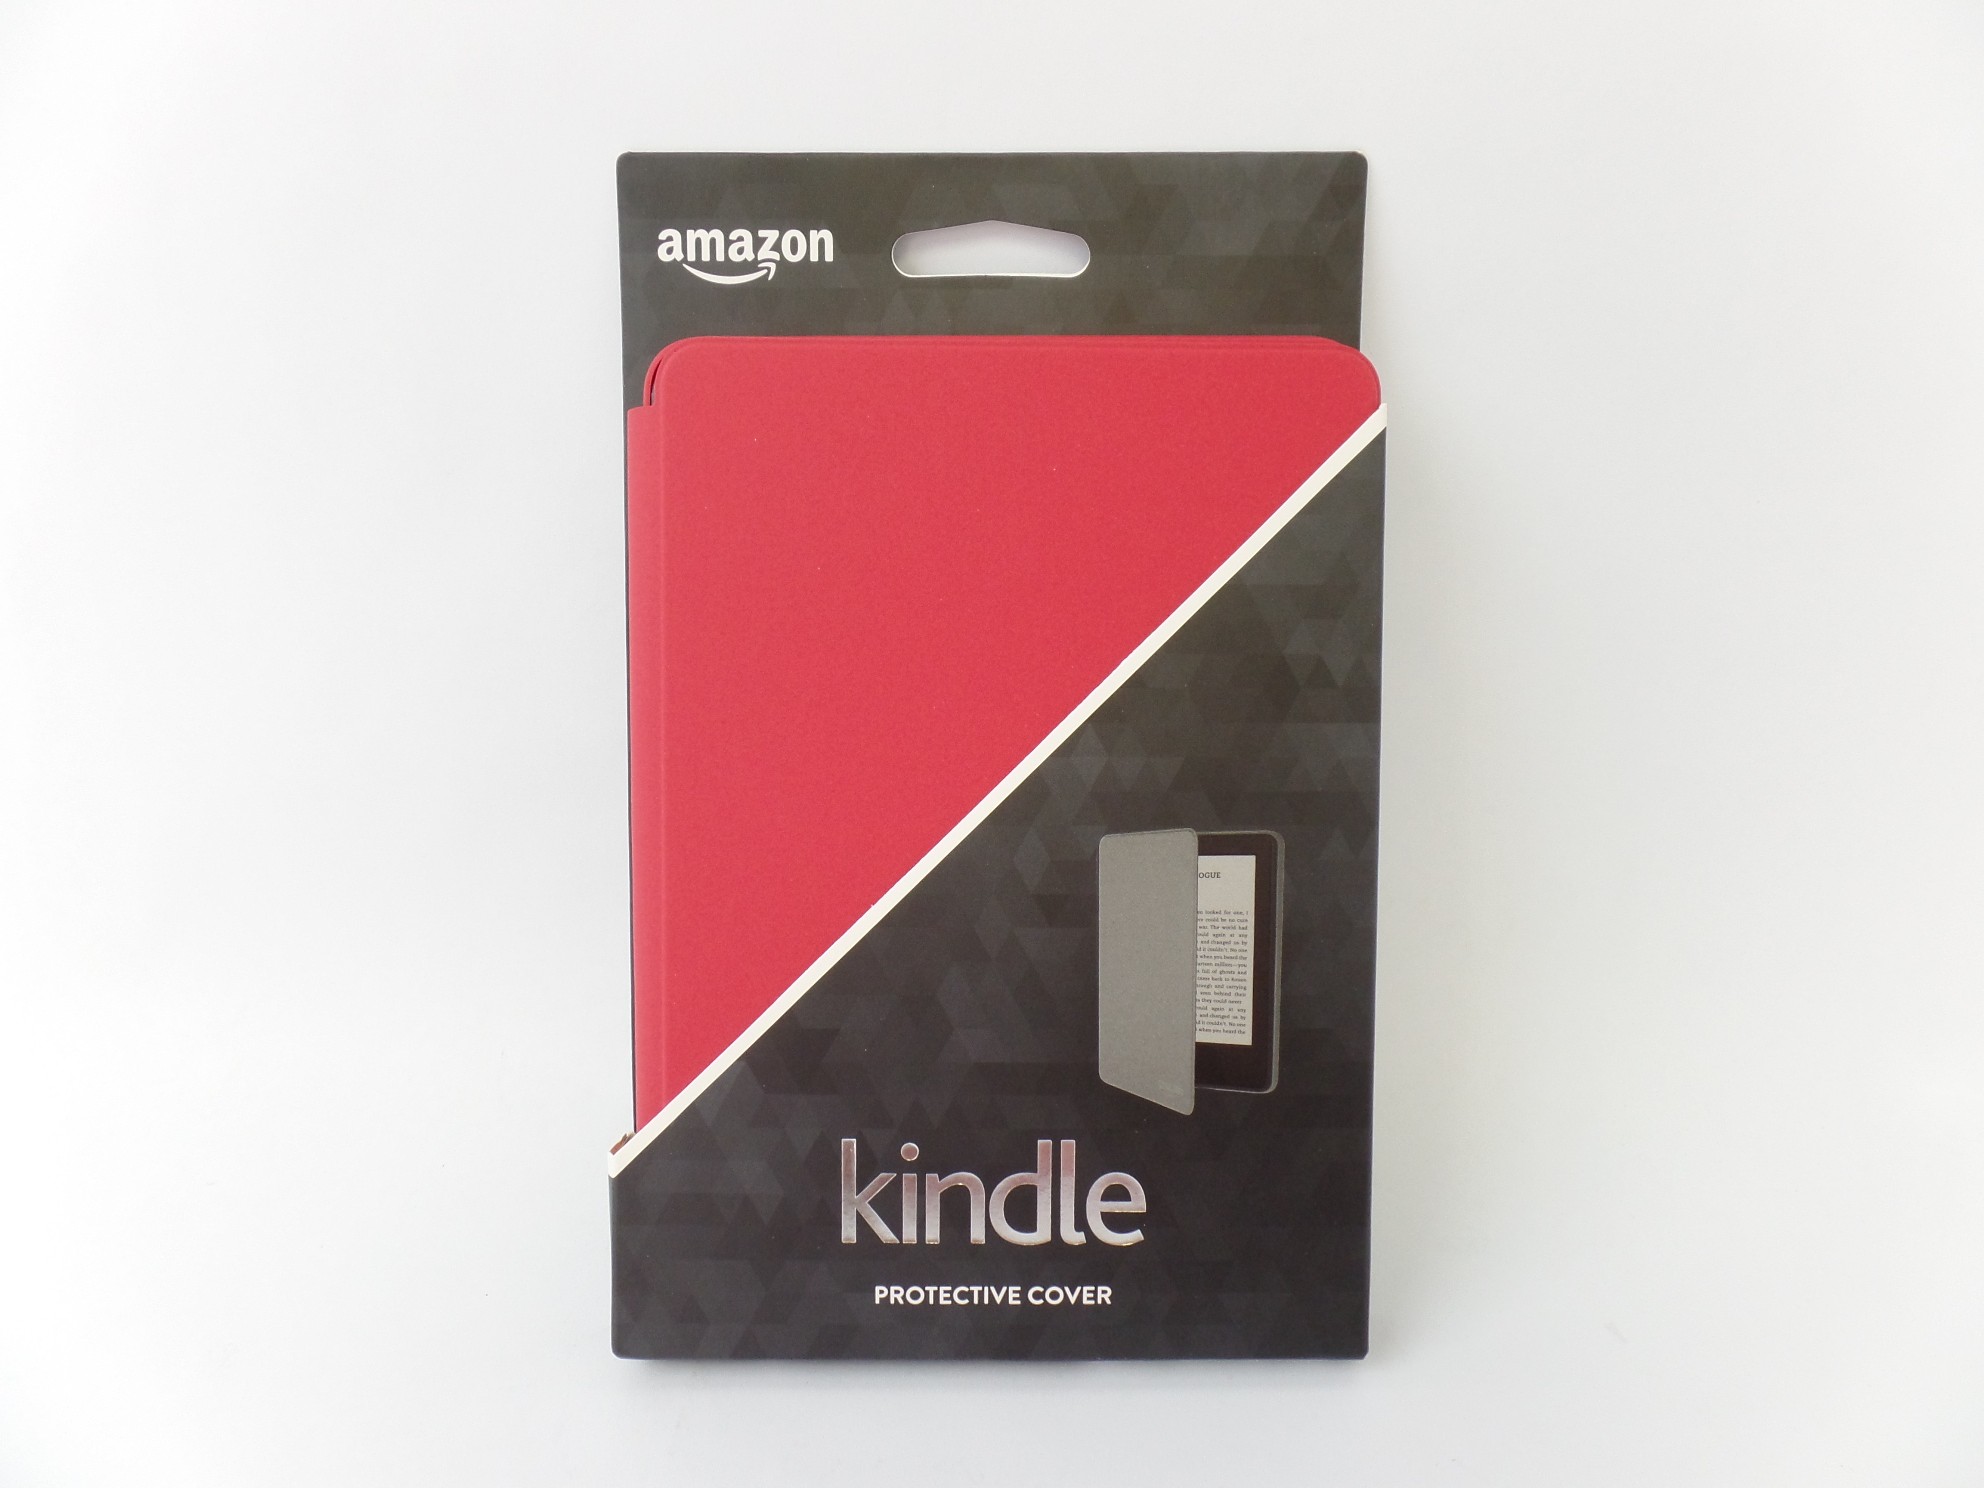 Amazon Kindle Protective Cover Cayenne Fits Kindle 7th Generation Red N61C90 BN